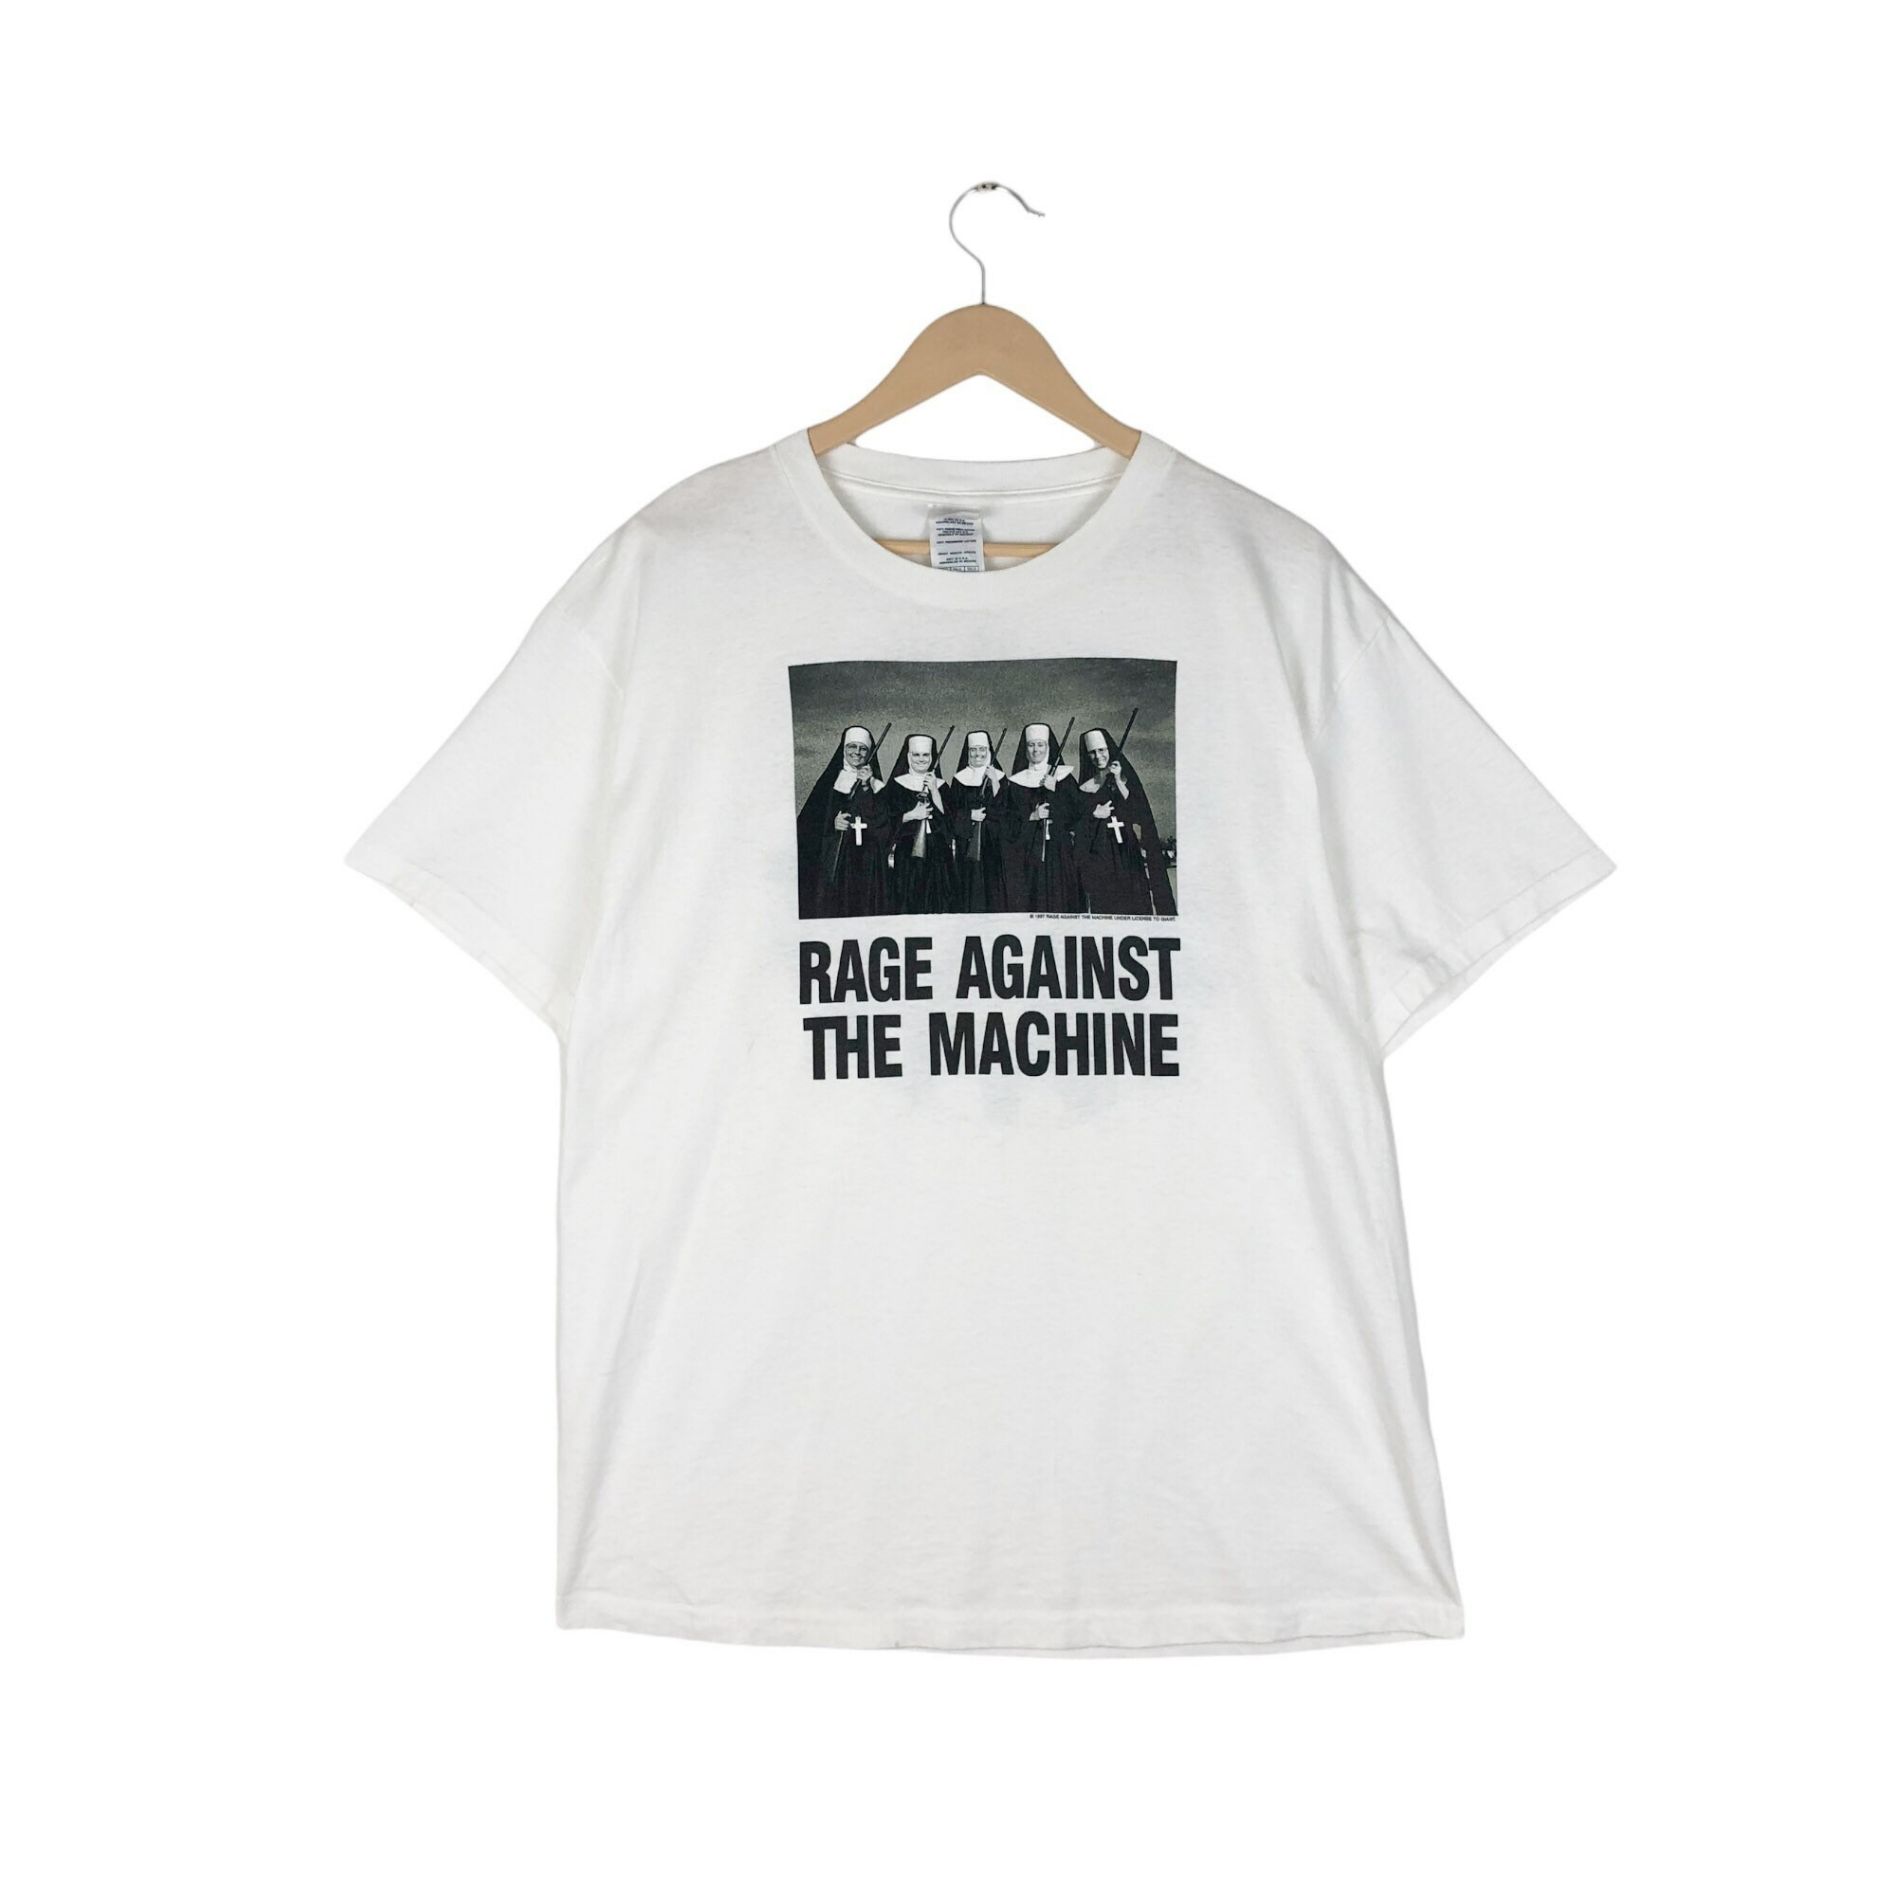 Vintage Rage Against The Machine Reissued on 2000s T-Shirt